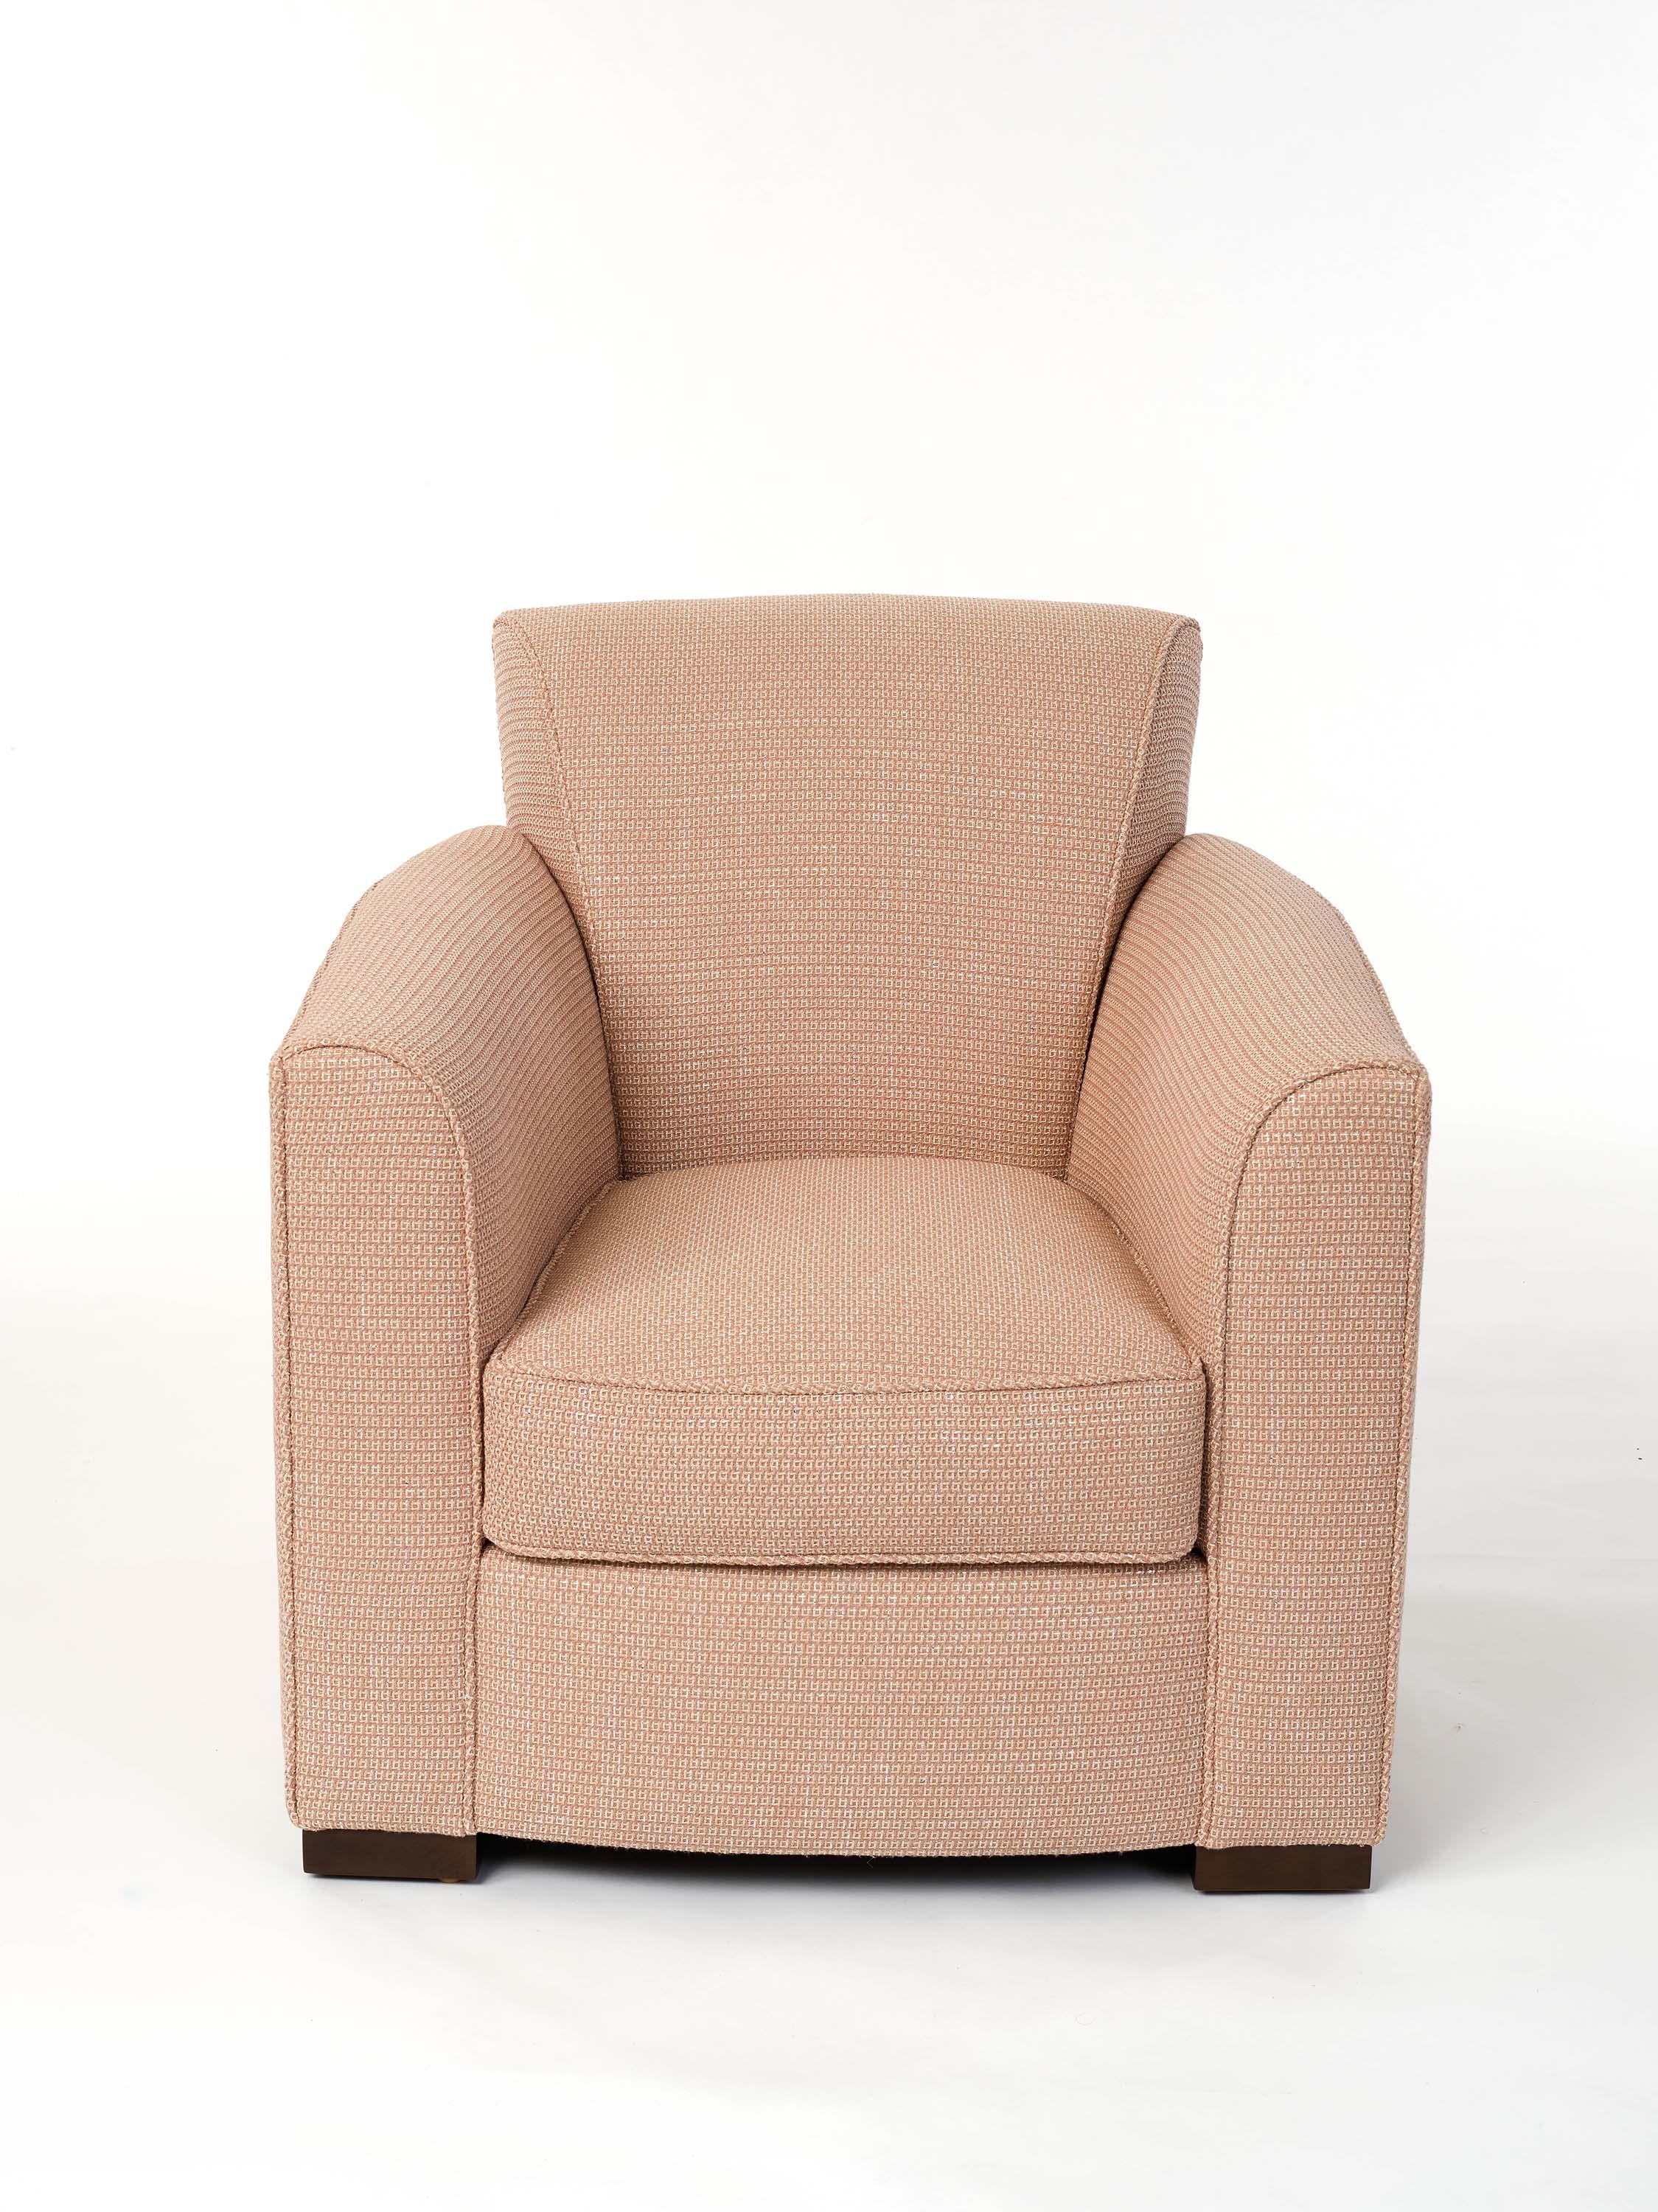 With a nod toward beauty and provenance this chair is uncluttered and approachable. Fully upholstered club chair with tight back and loose seat cushion. Comes standard with welt along the body and seat cushion. Available in all standard, premium,